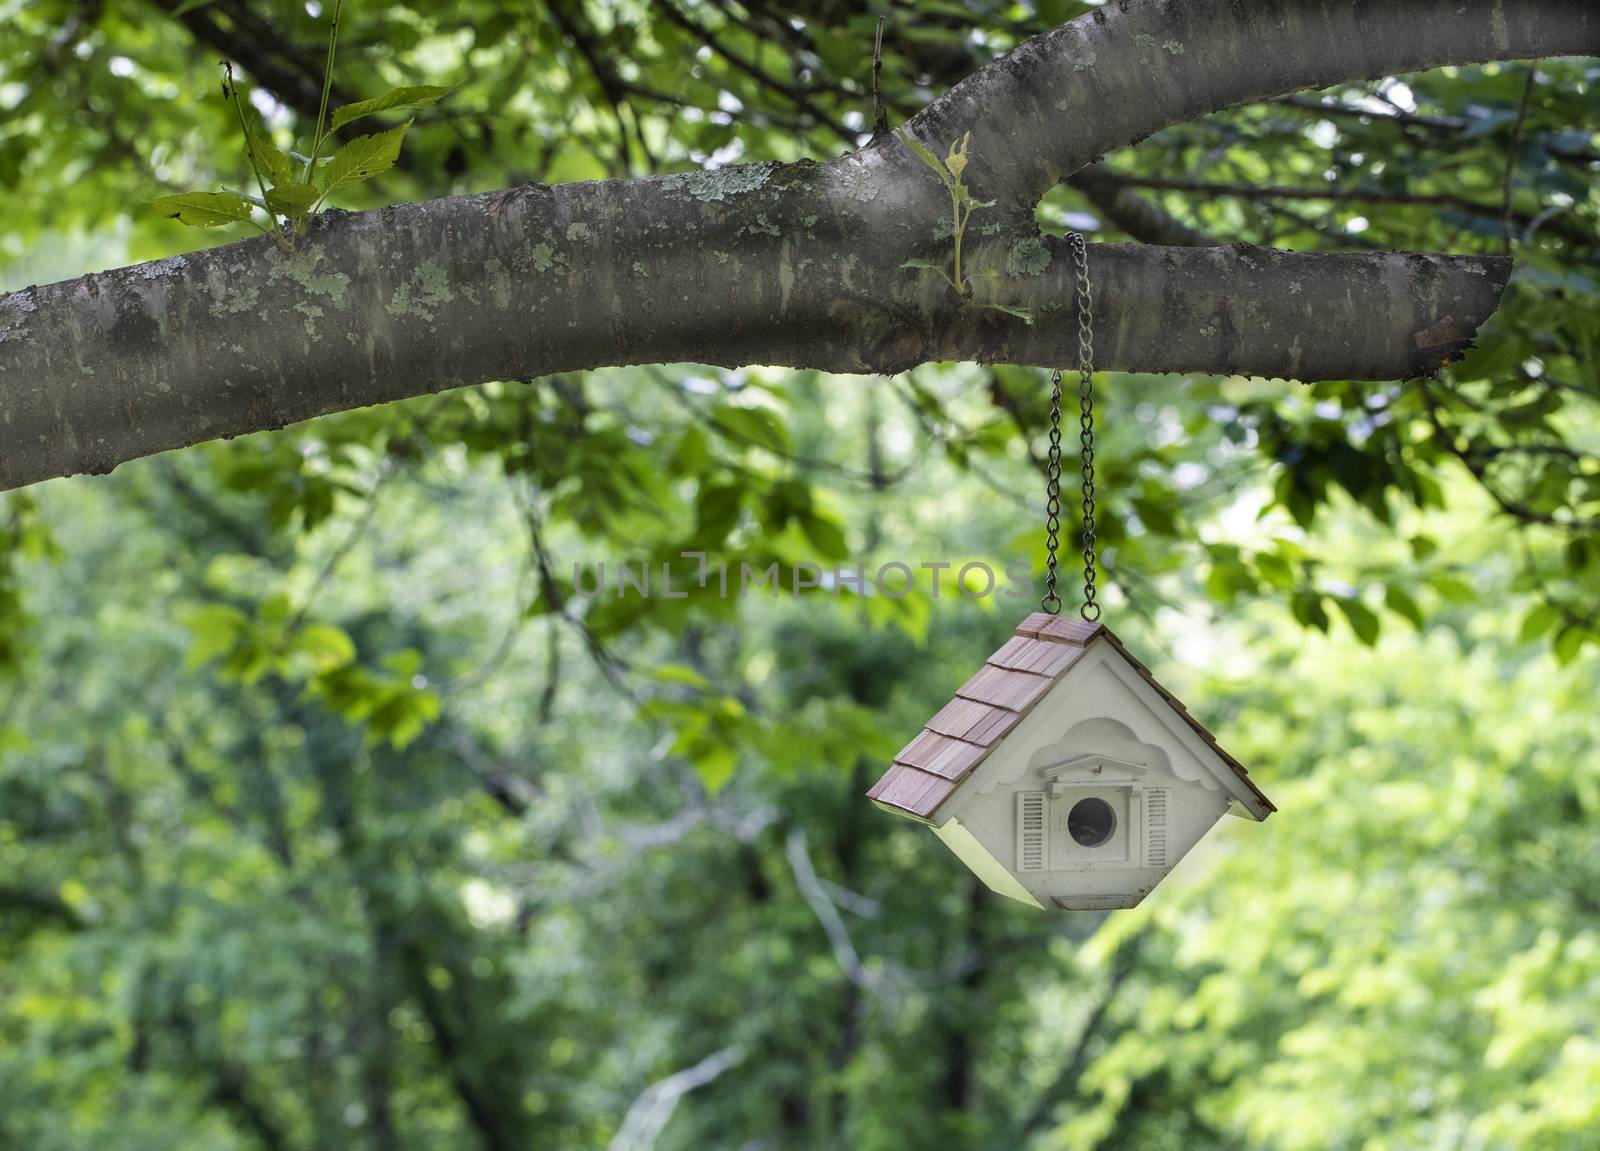 New bird house hangs by a chain from a cherry tree limb.